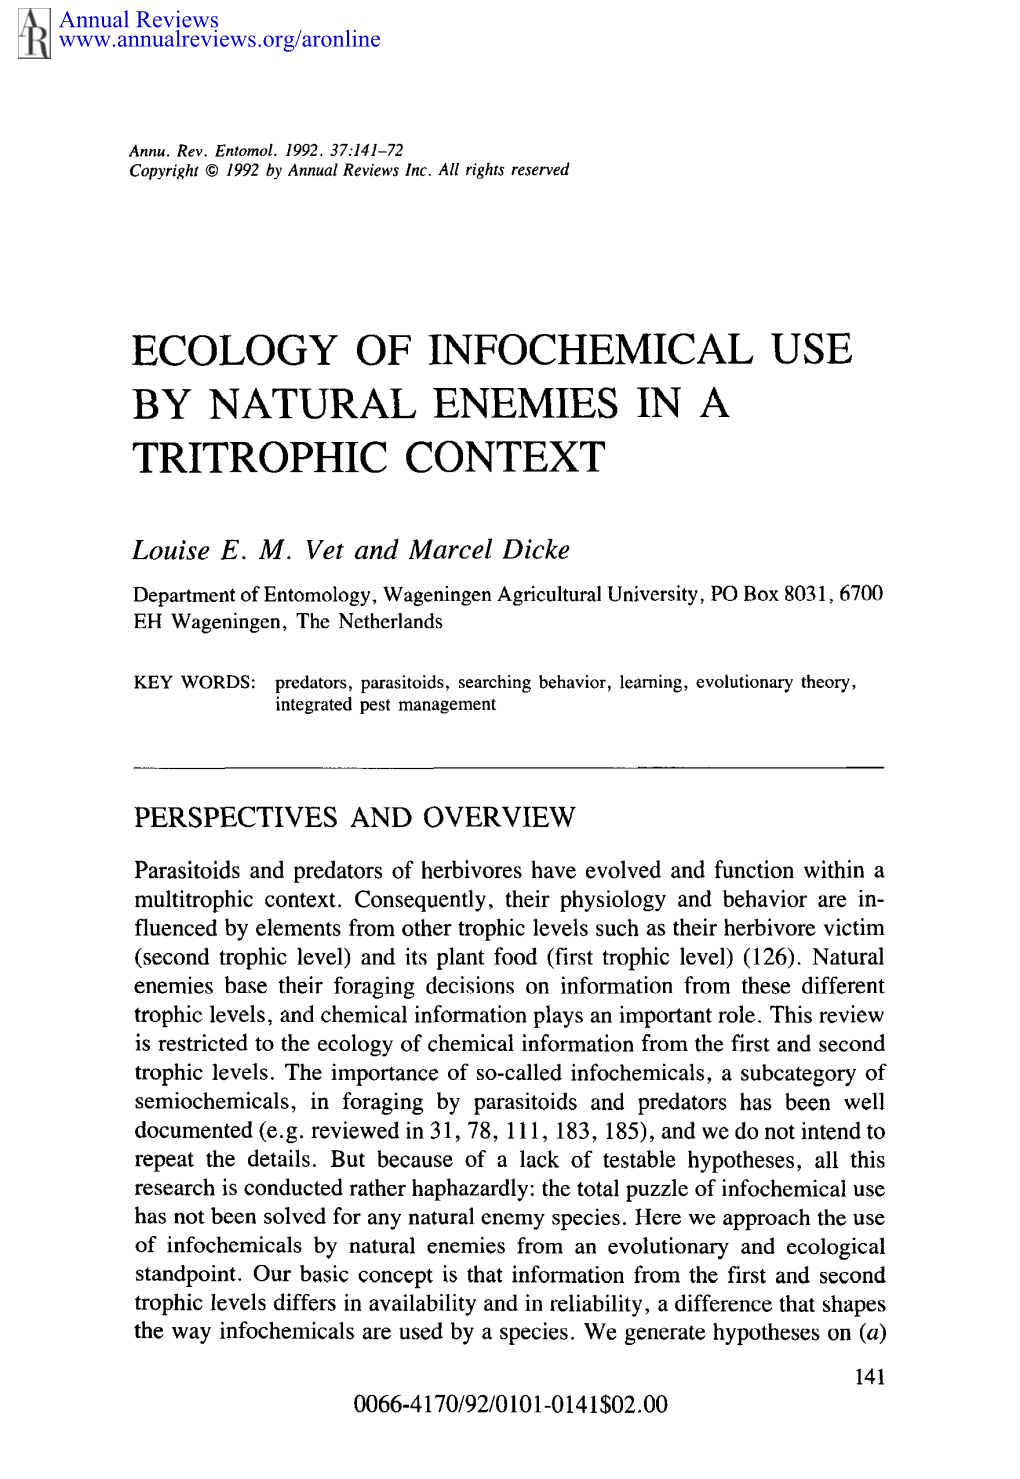 Ecology of Infochemical by Natural Enemies in A